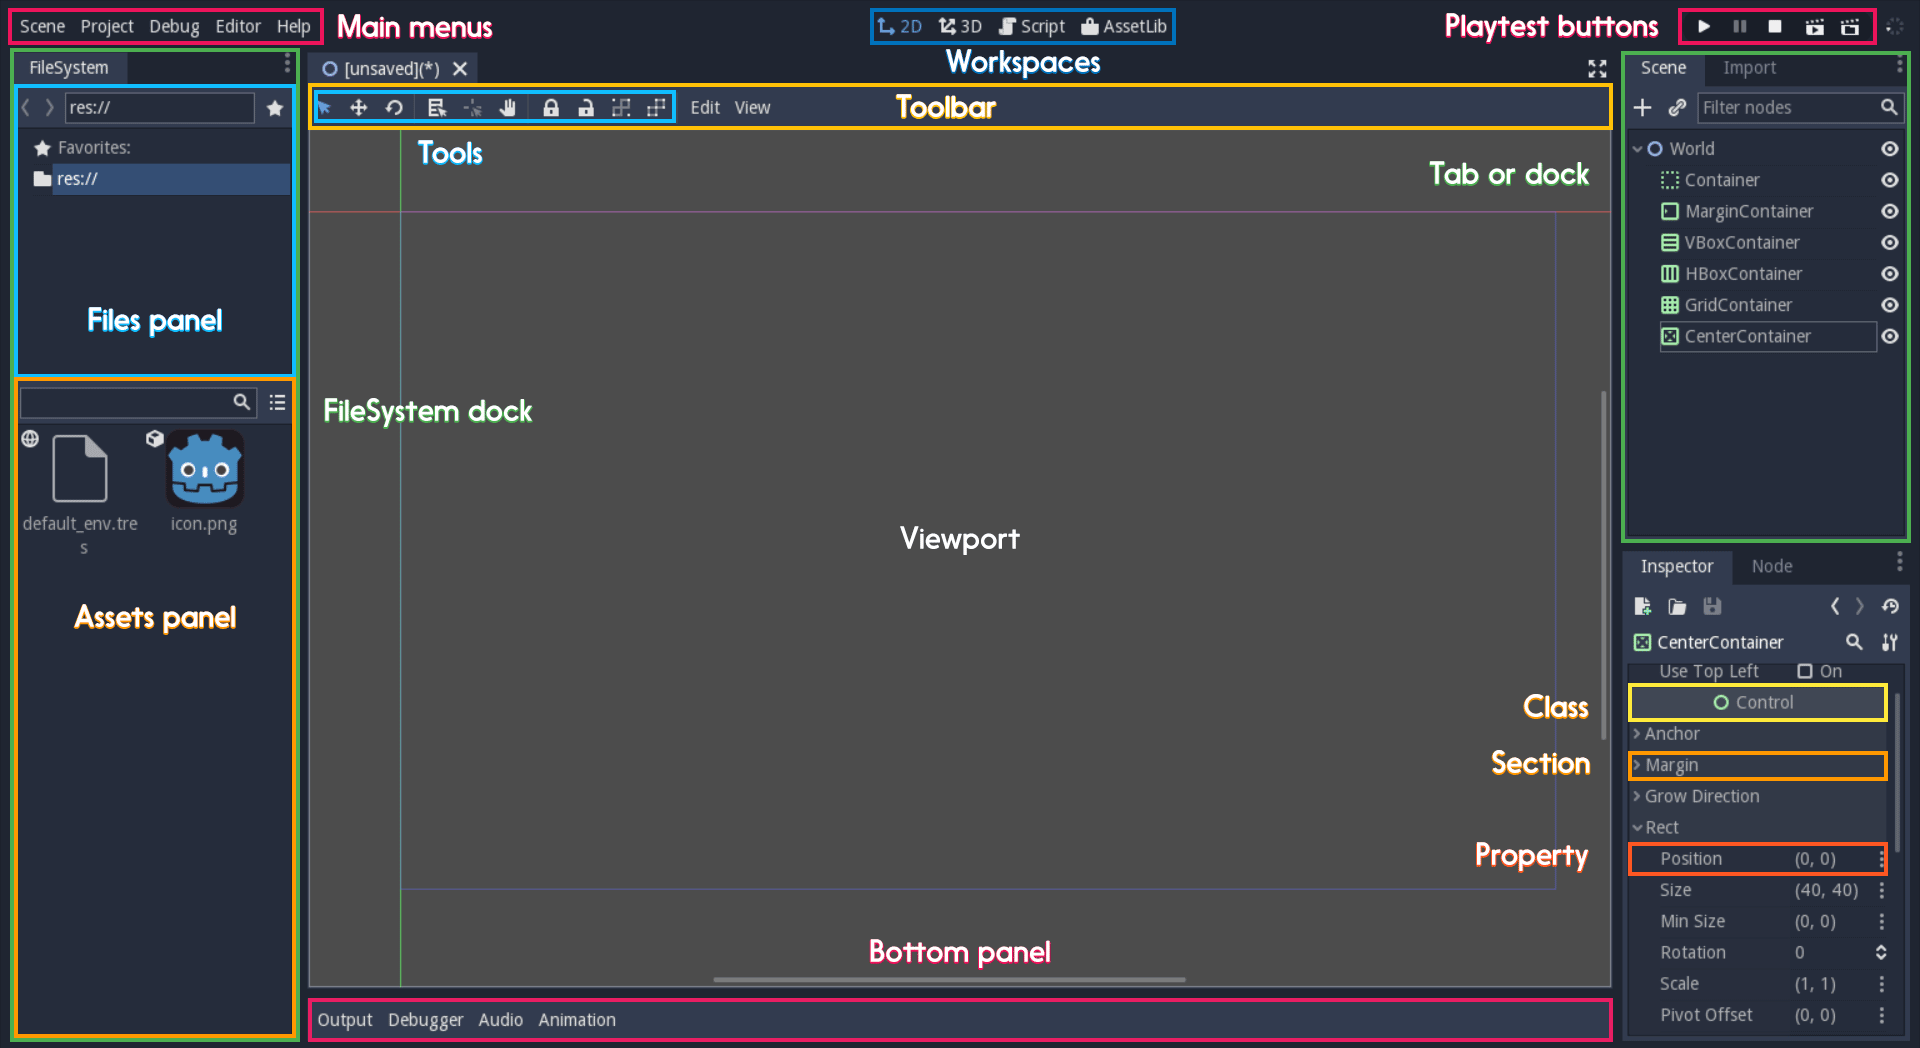 Overview of the interface and common vocabulary